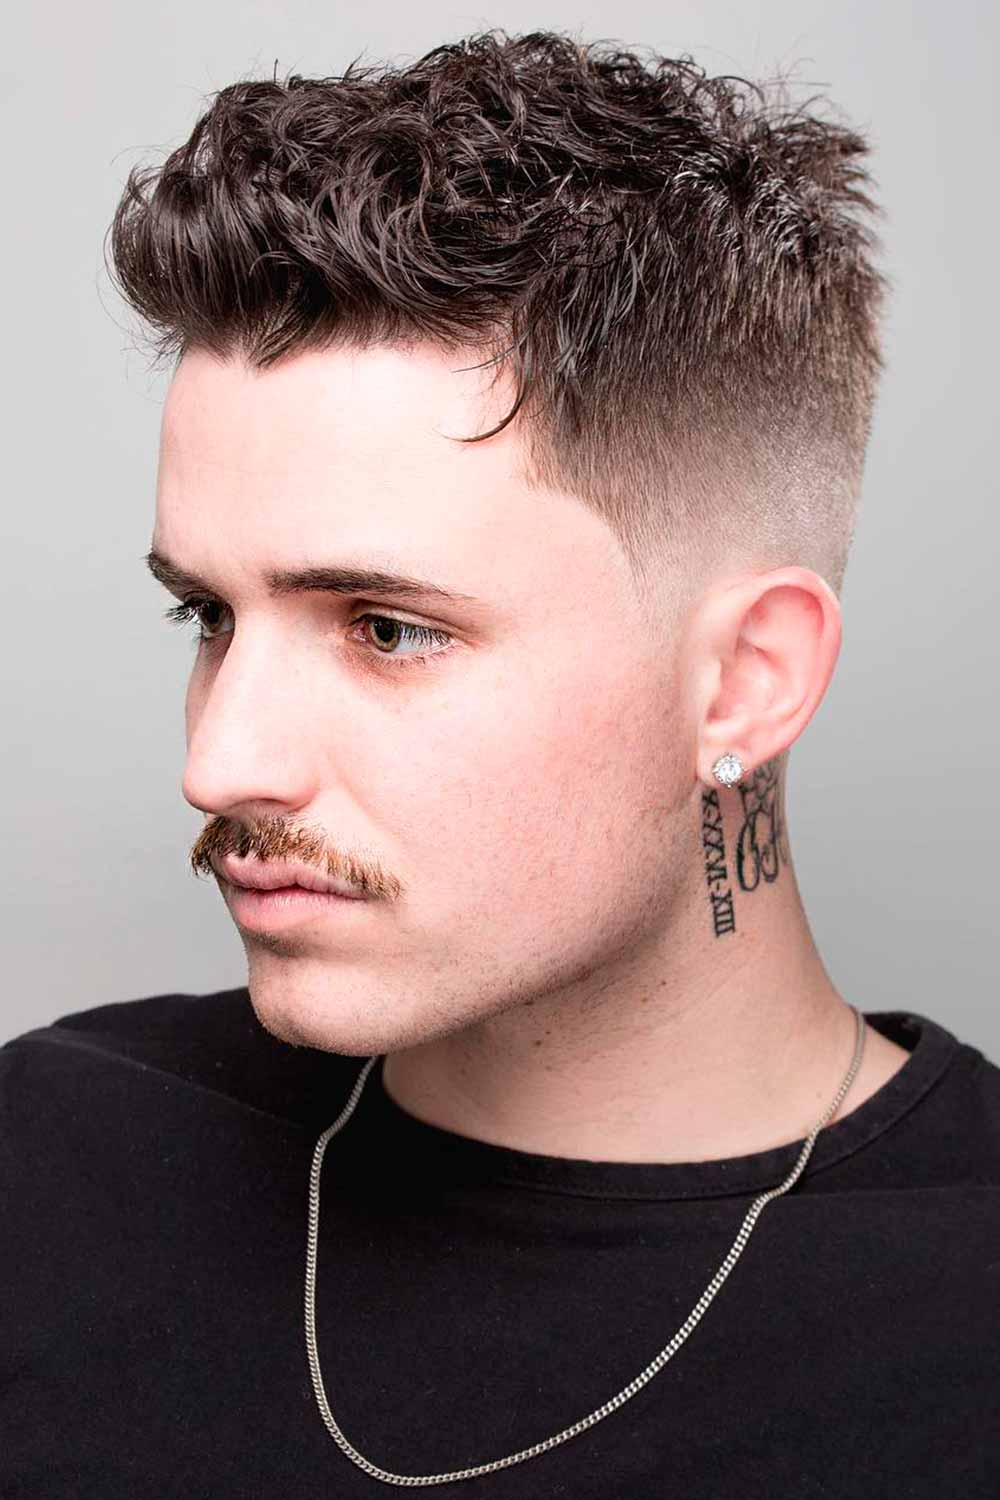 Pencil Thin Mustache #mustache #moustache #mustachestyles #mustaches